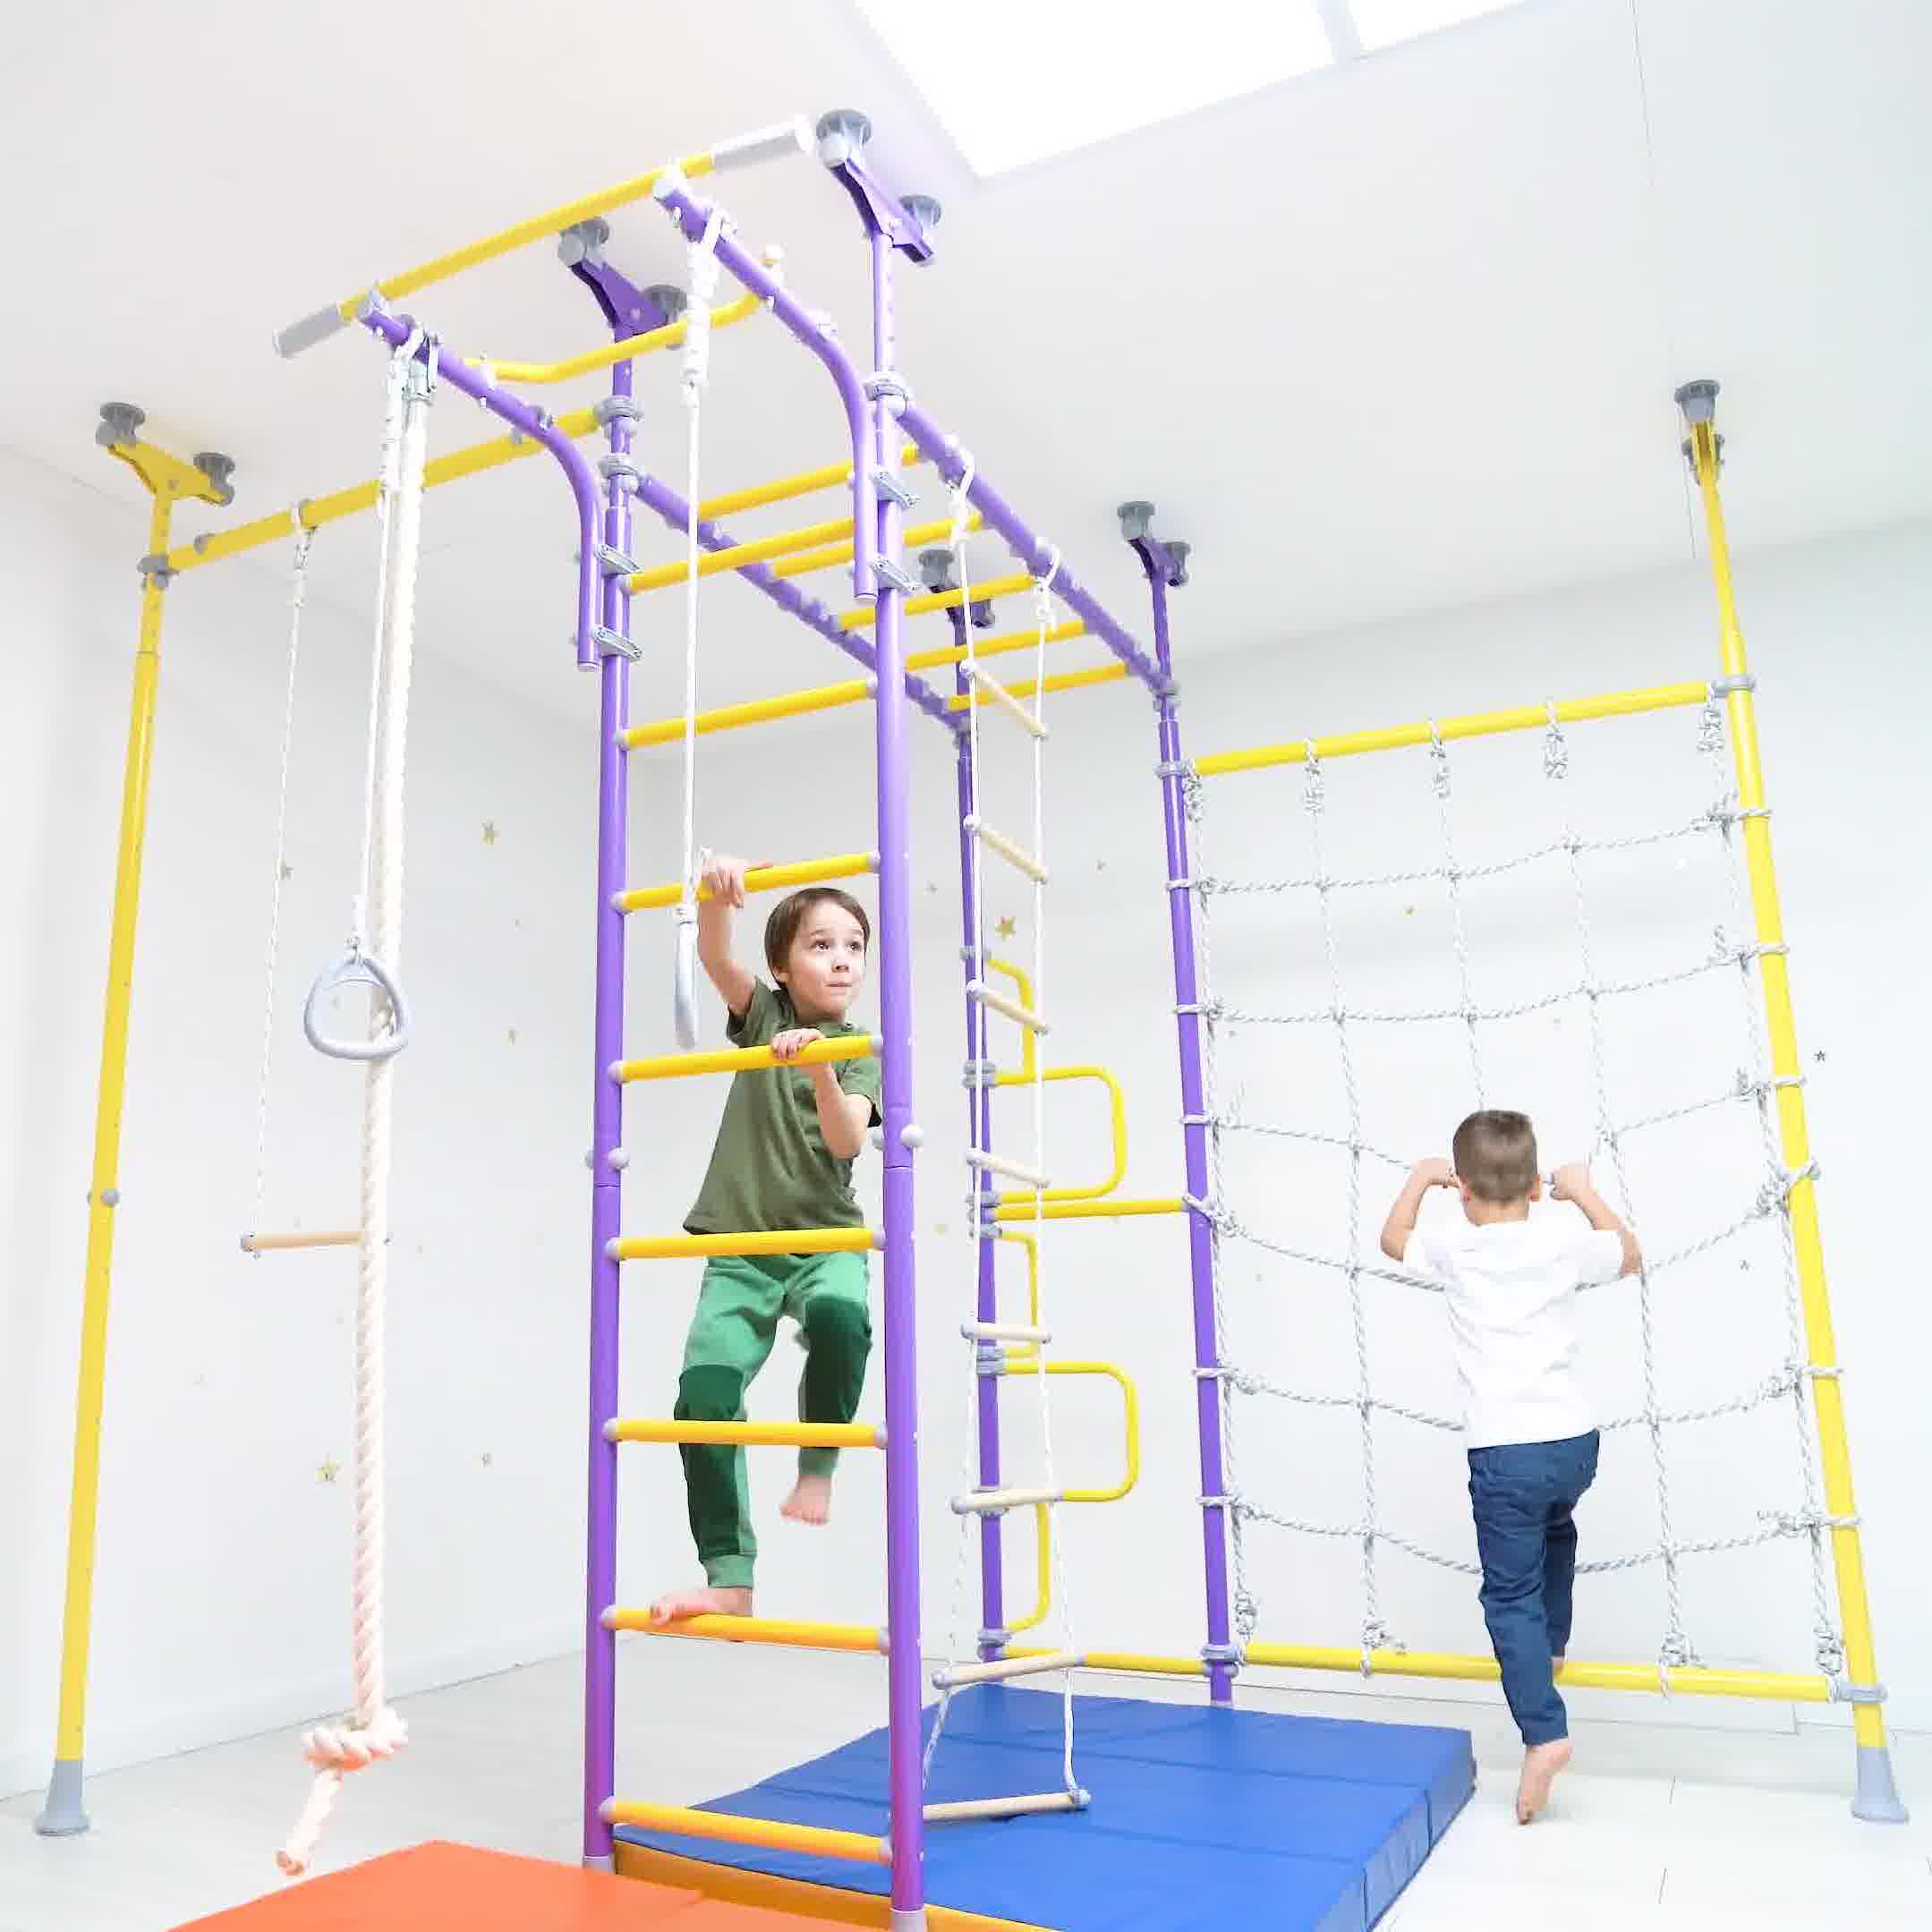 Ninja home play gym set for a complete family fun play at home